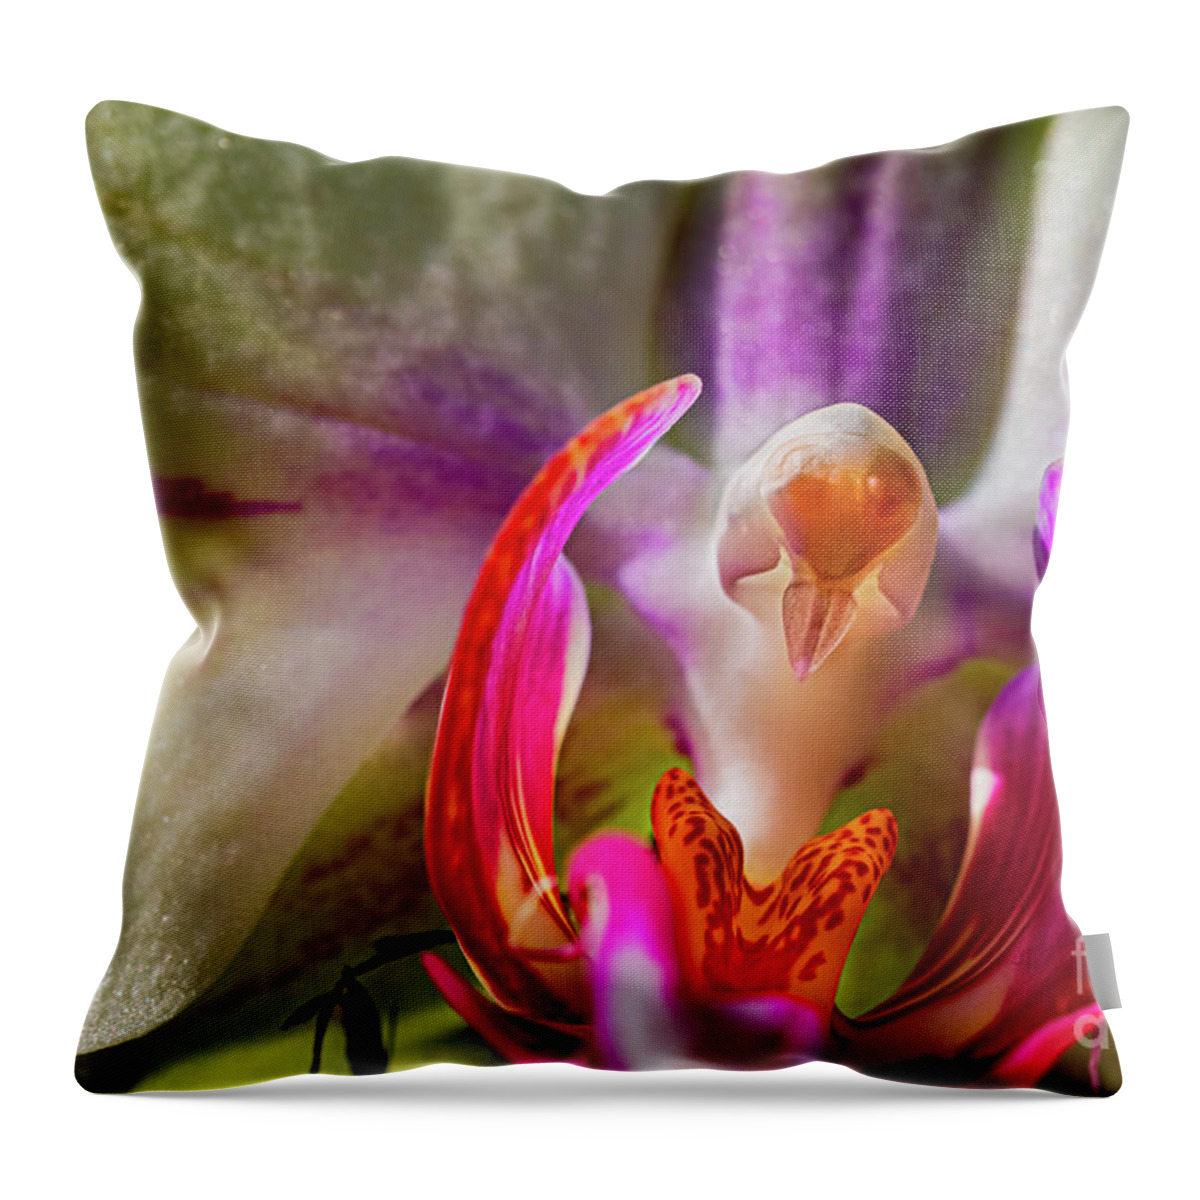 Orchids In Spring Throw Pillow featuring the painting Orchids In Spring, Close Up On Blurred Background by European School